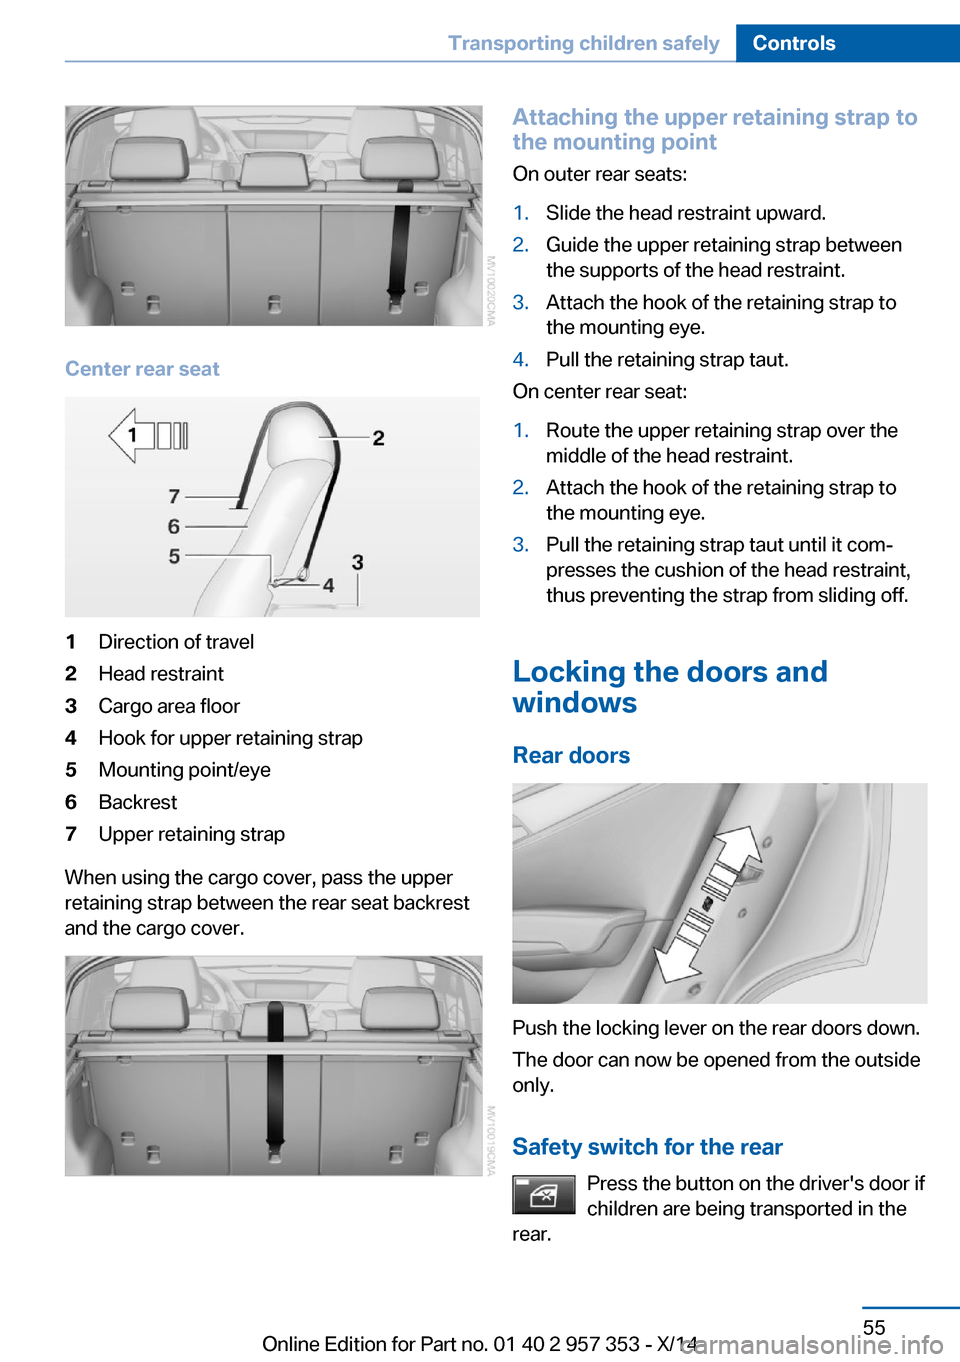 BMW X1 2014 E84 Owners Guide Center rear seat
1Direction of travel2Head restraint3Cargo area floor4Hook for upper retaining strap5Mounting point/eye6Backrest7Upper retaining strap
When using the cargo cover, pass the upper
retain